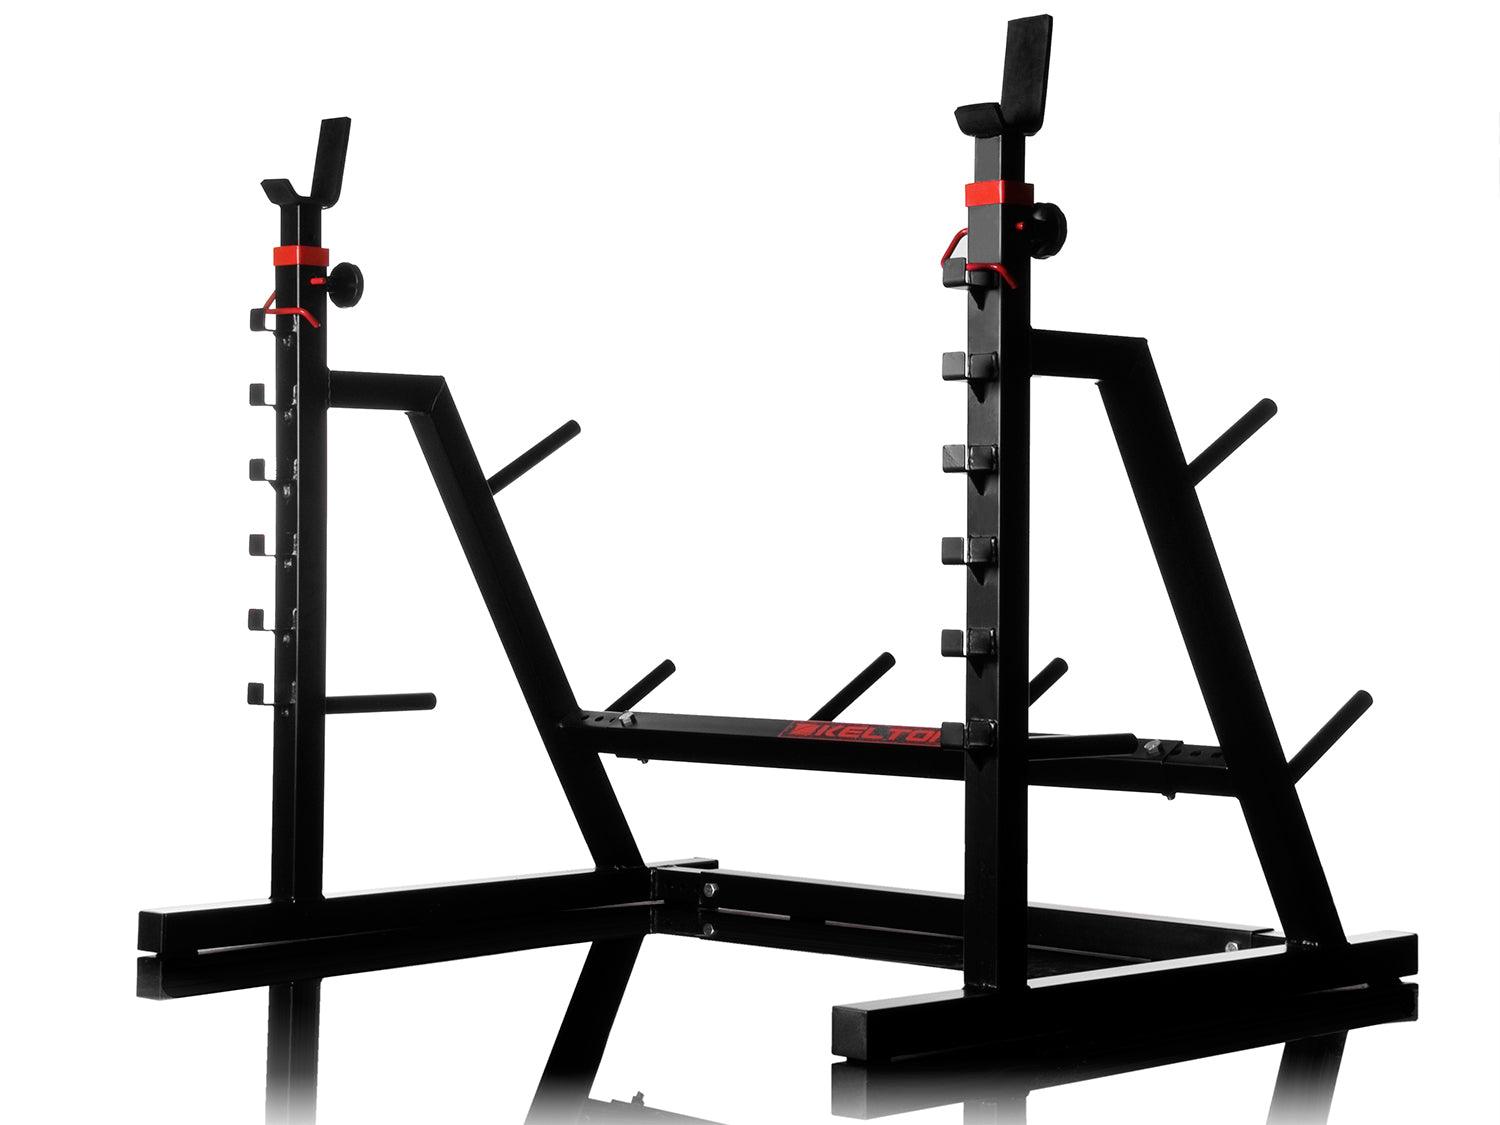 Multi-function Stand and Weight Rack - Fitness Health 